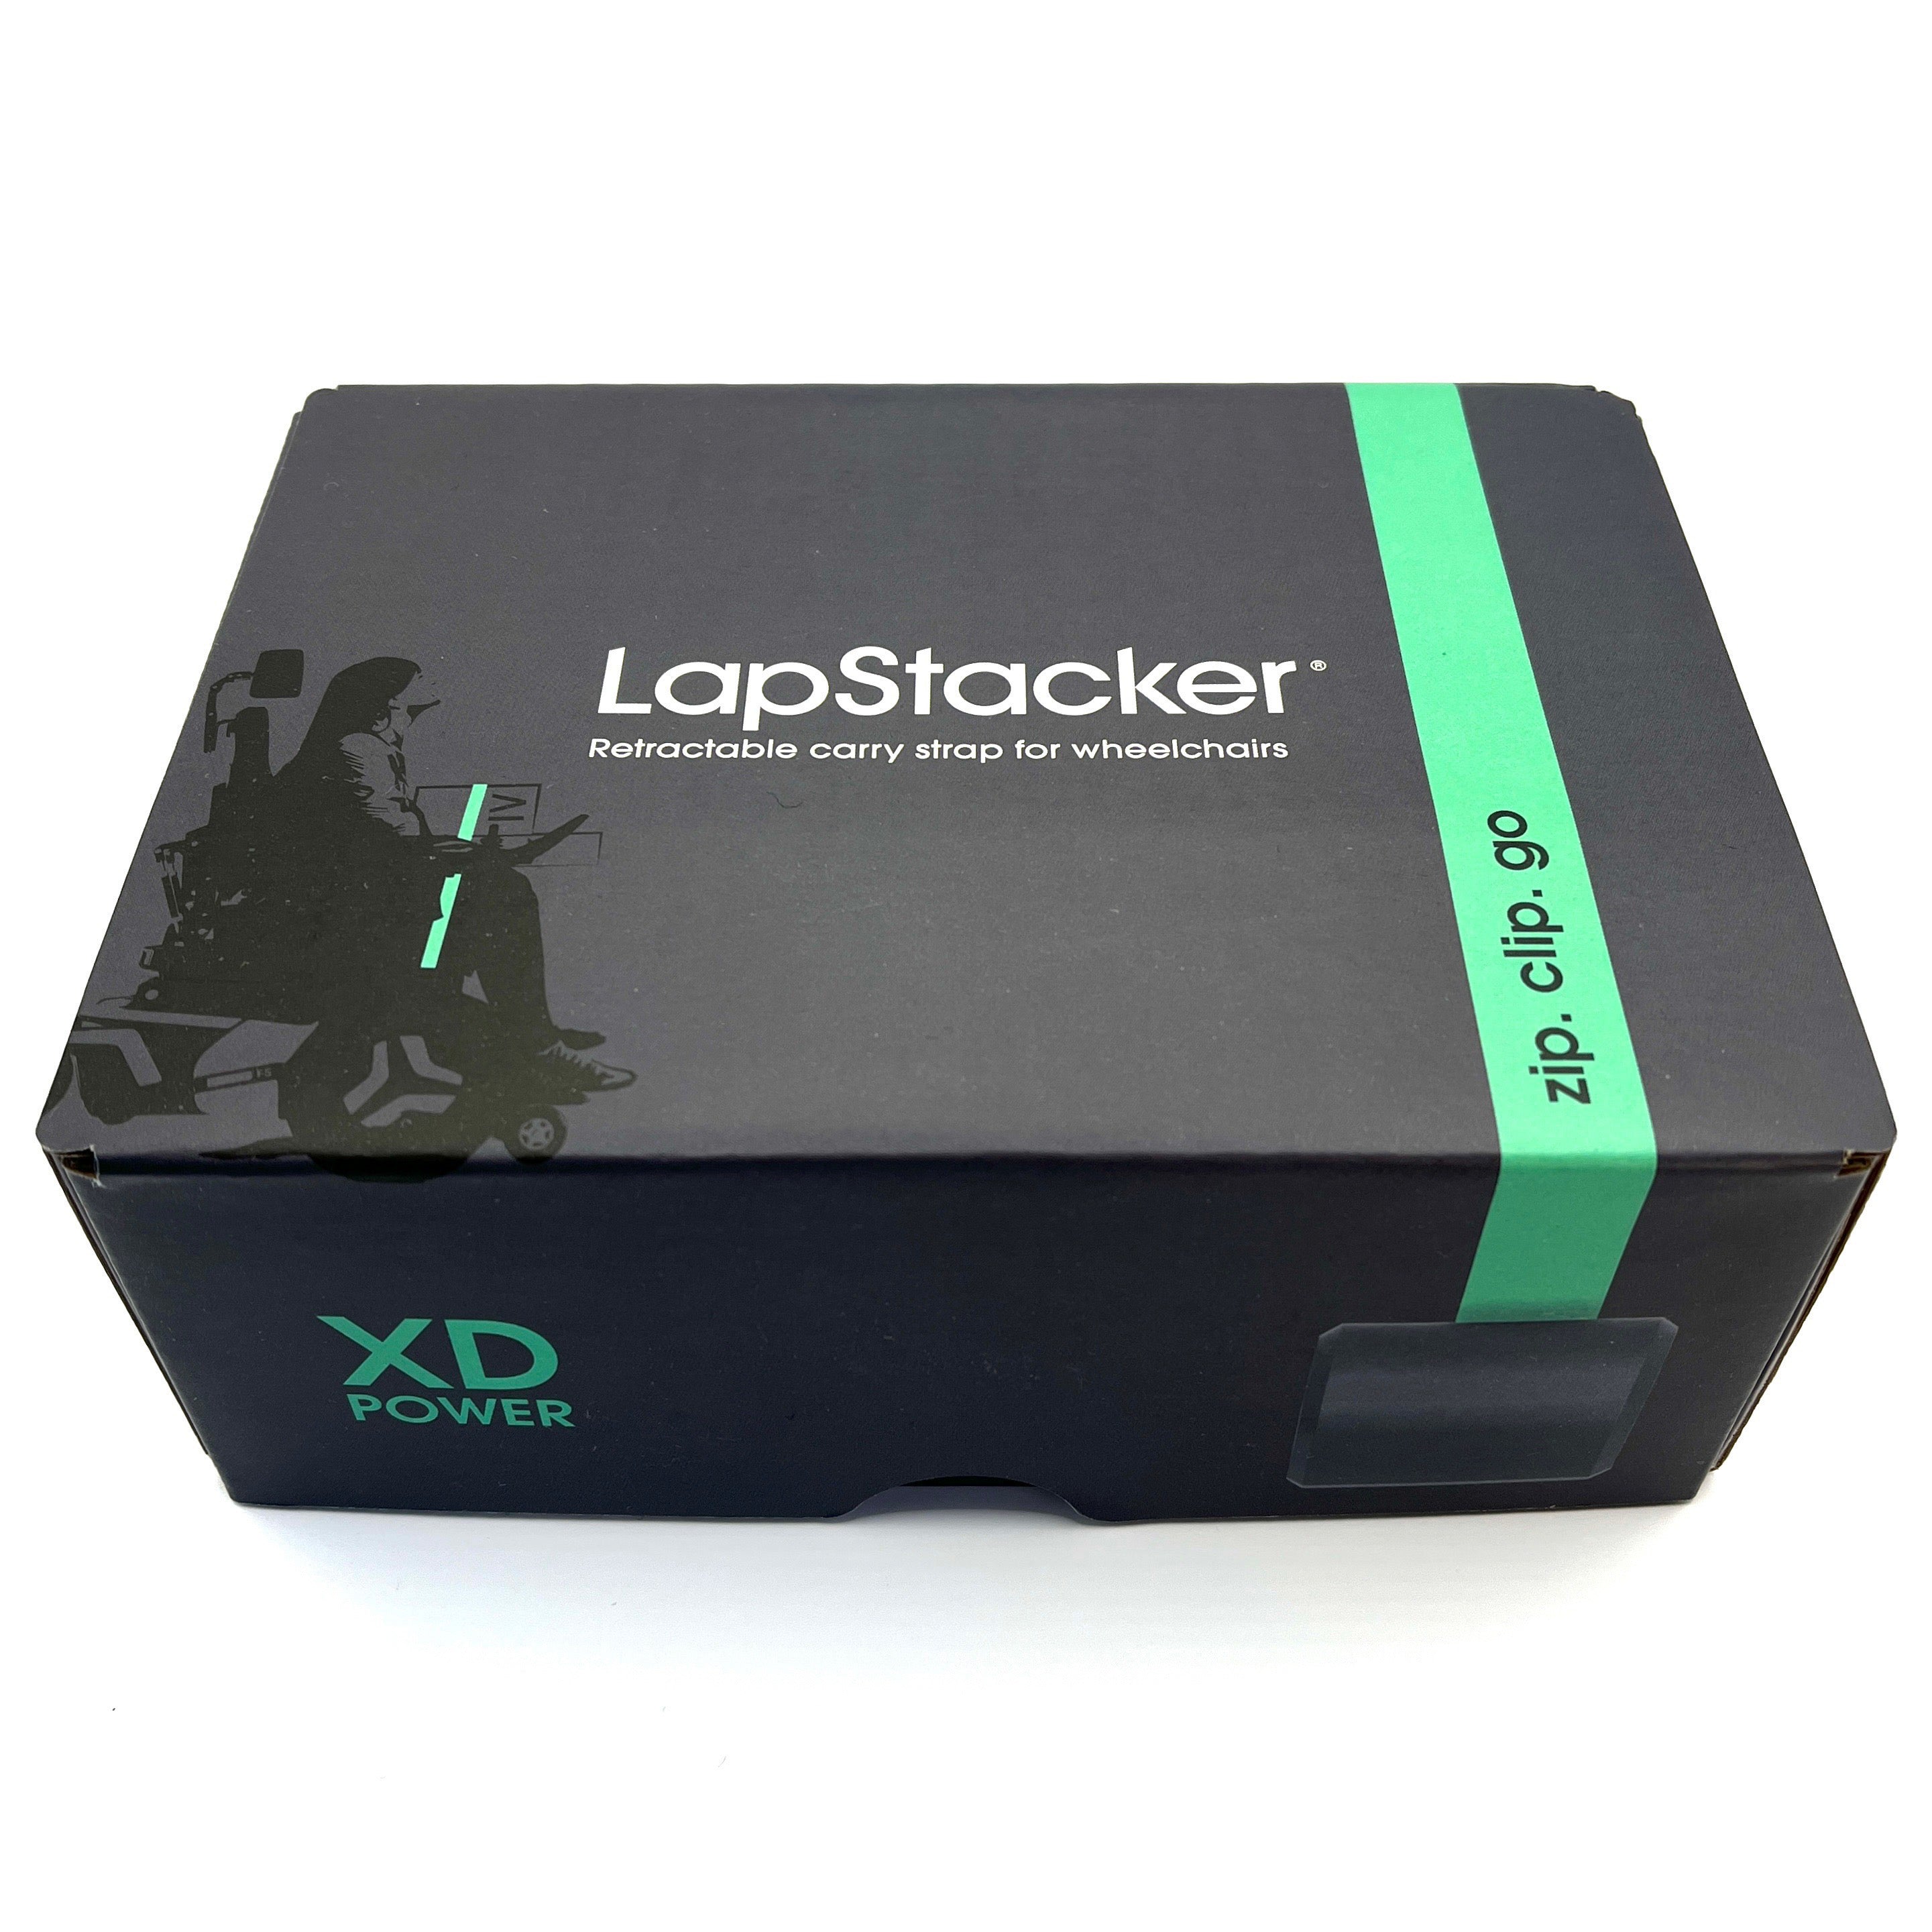 LapStacker XD packaging, a box with green and black colours